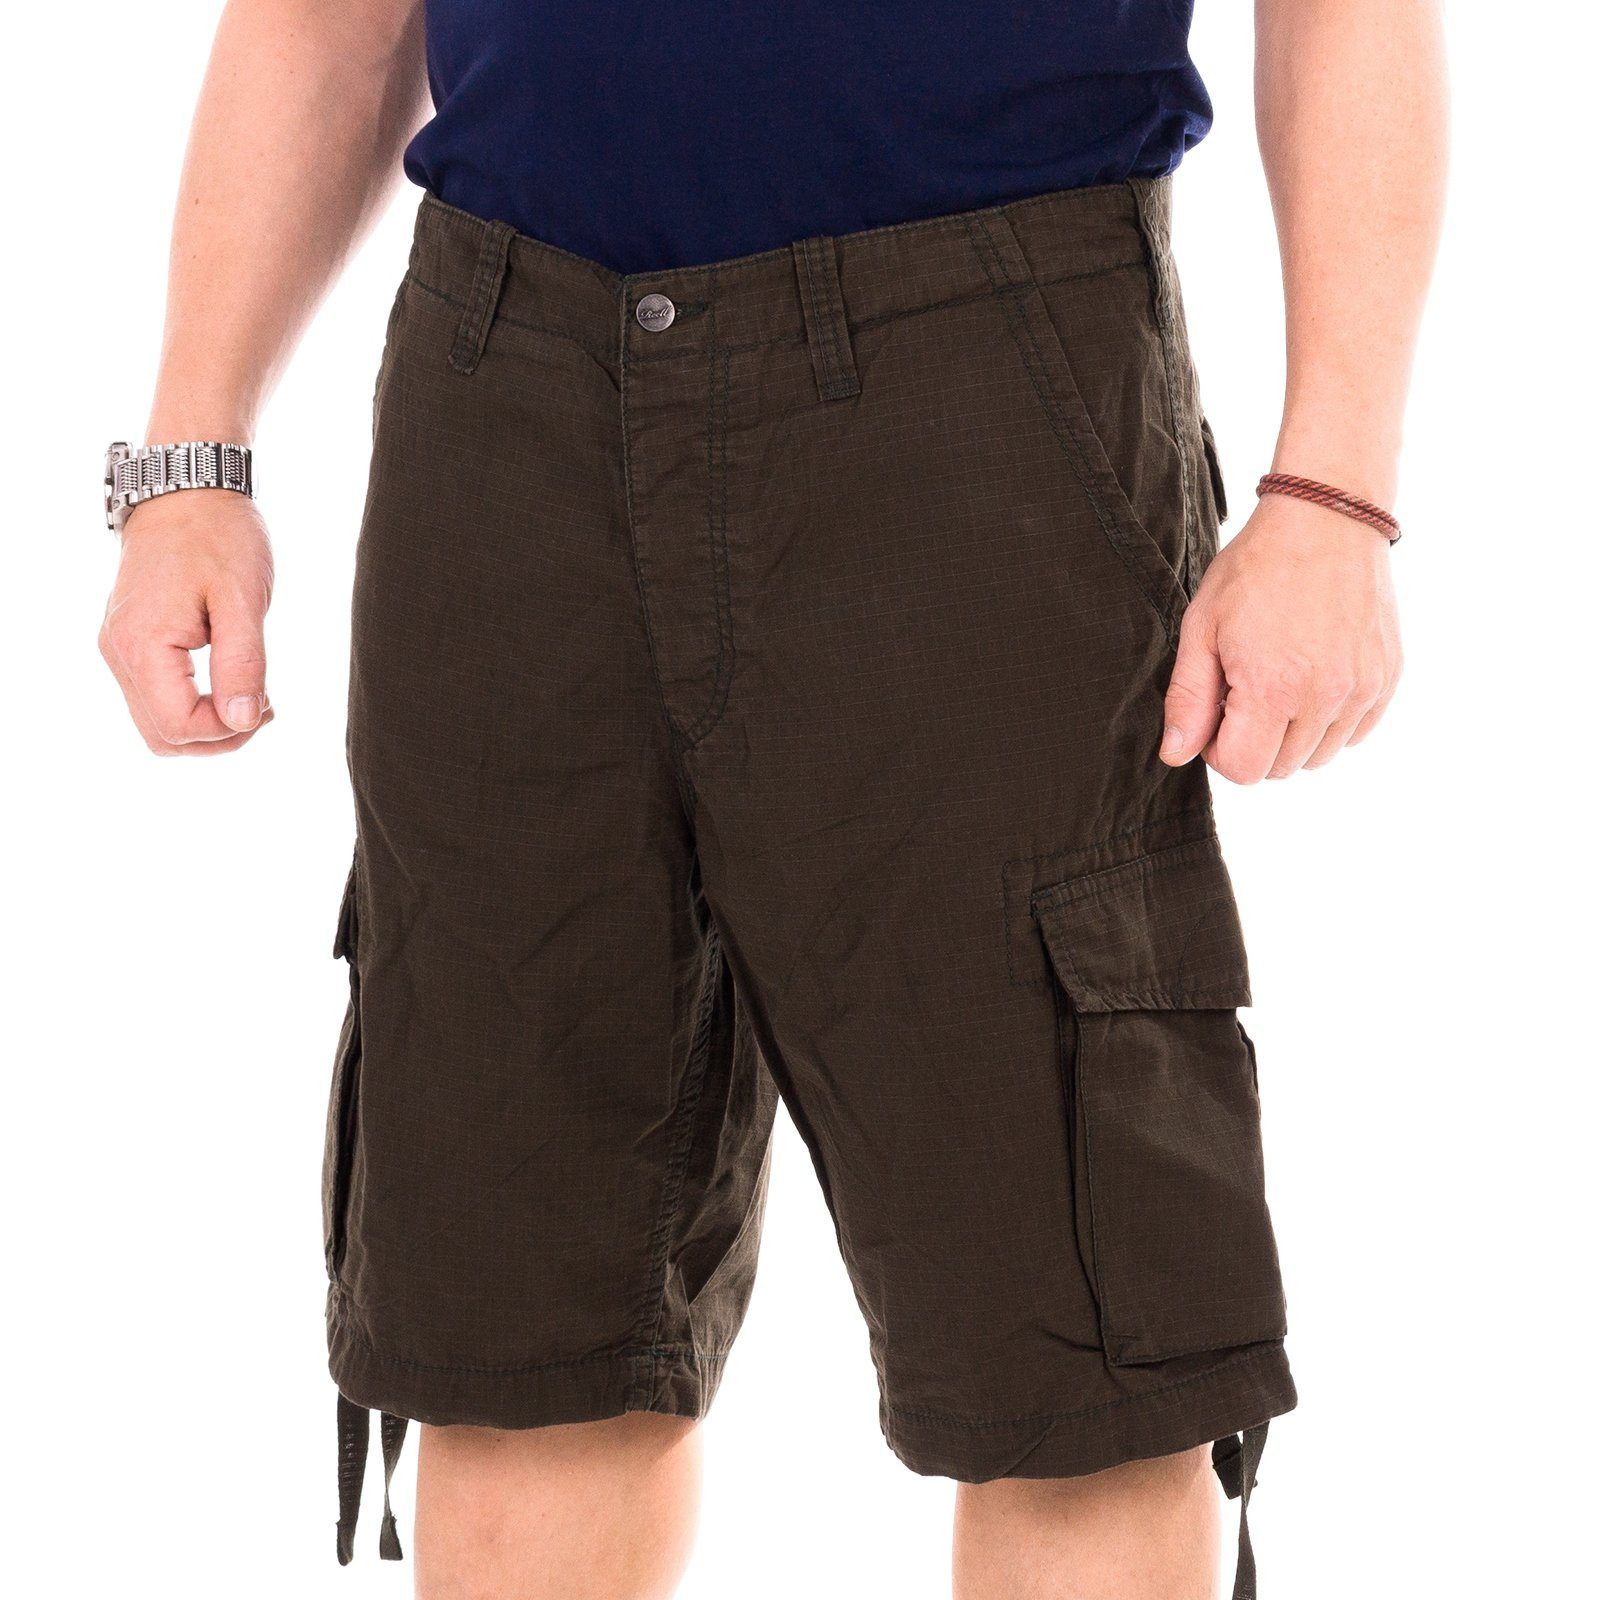 REELL Cargoshorts Short Reell New Cargo forest gre